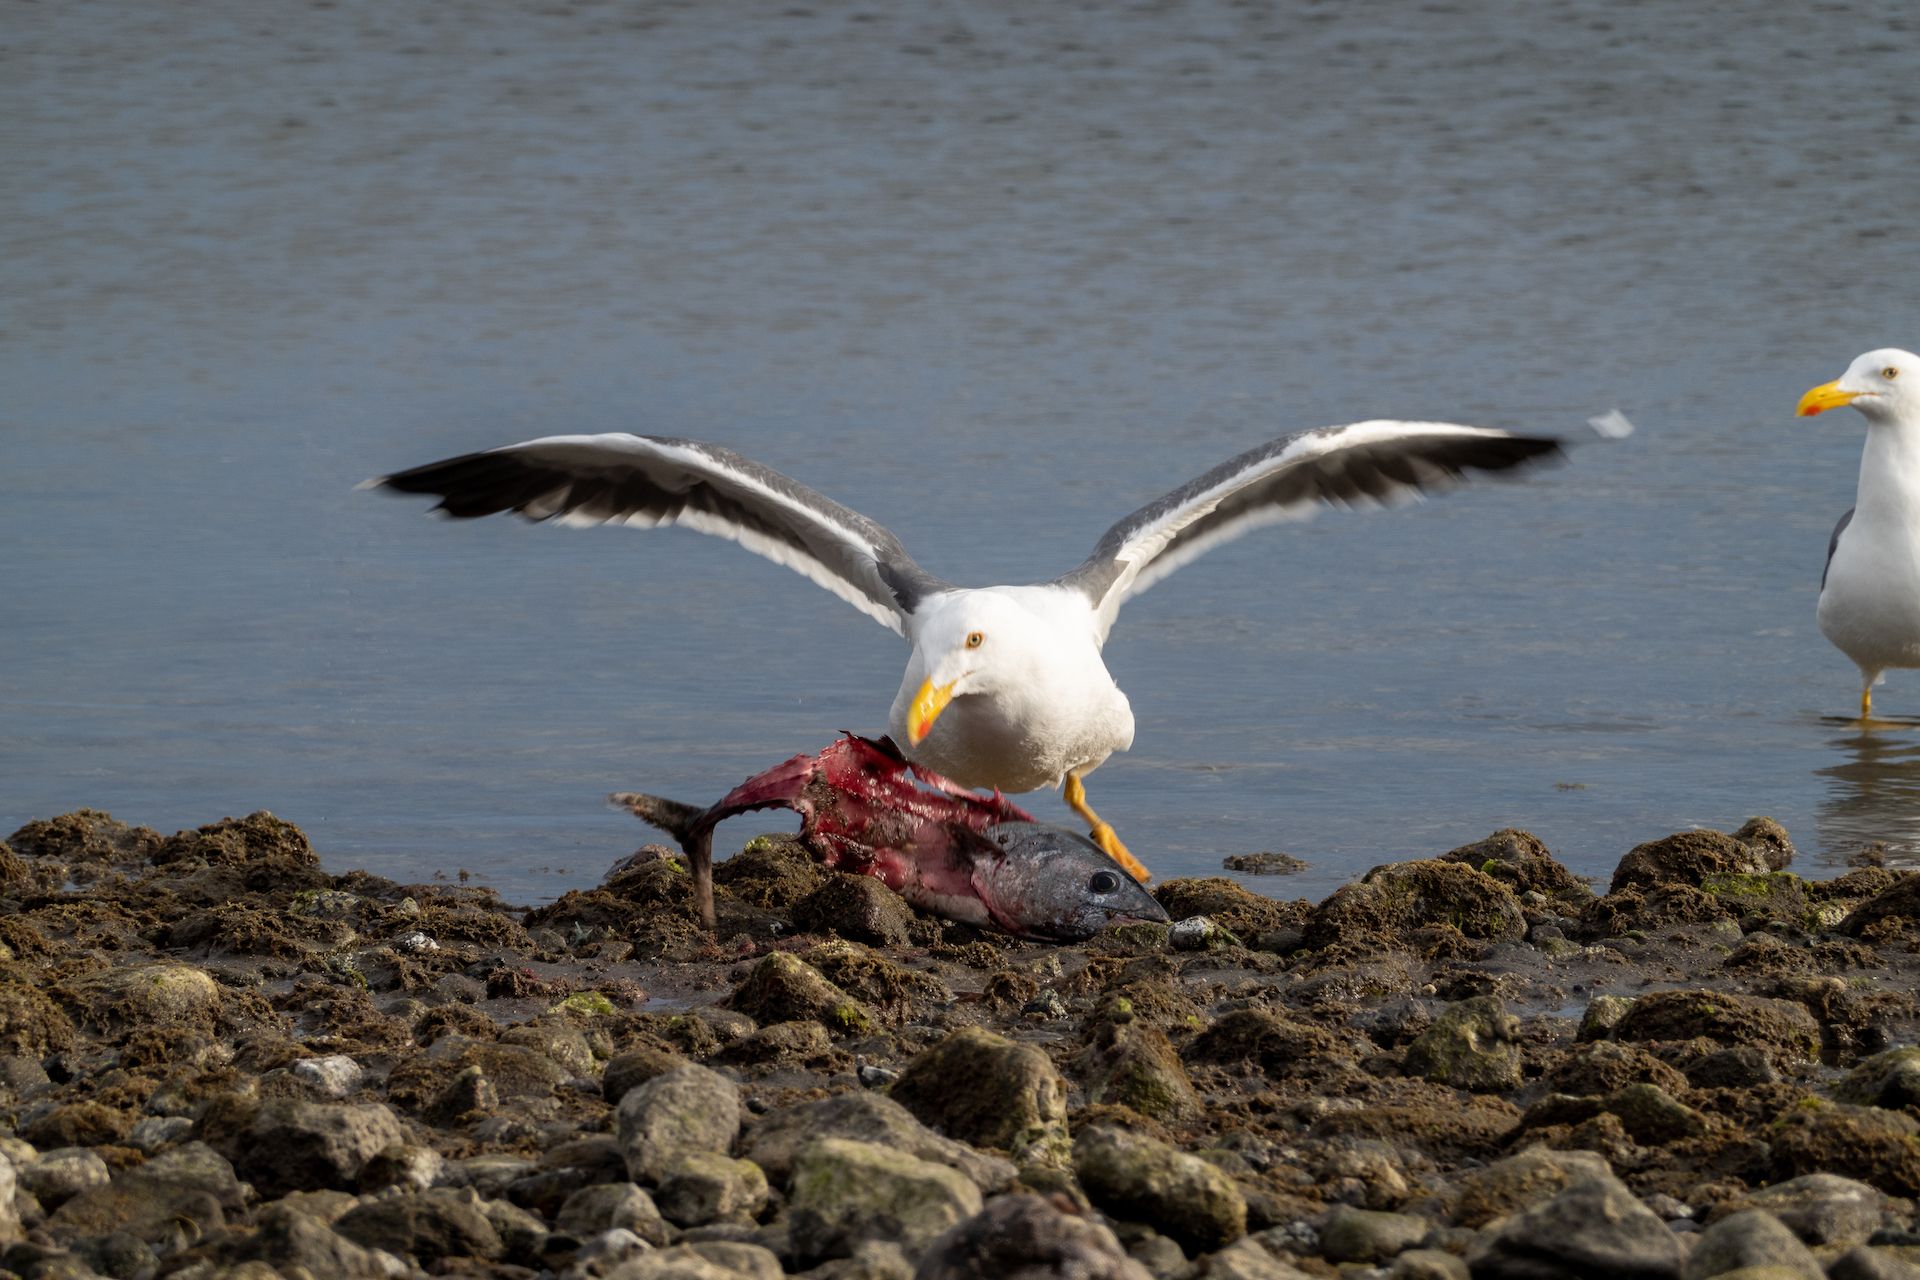 The seabirds were fighting for the “leftovers”